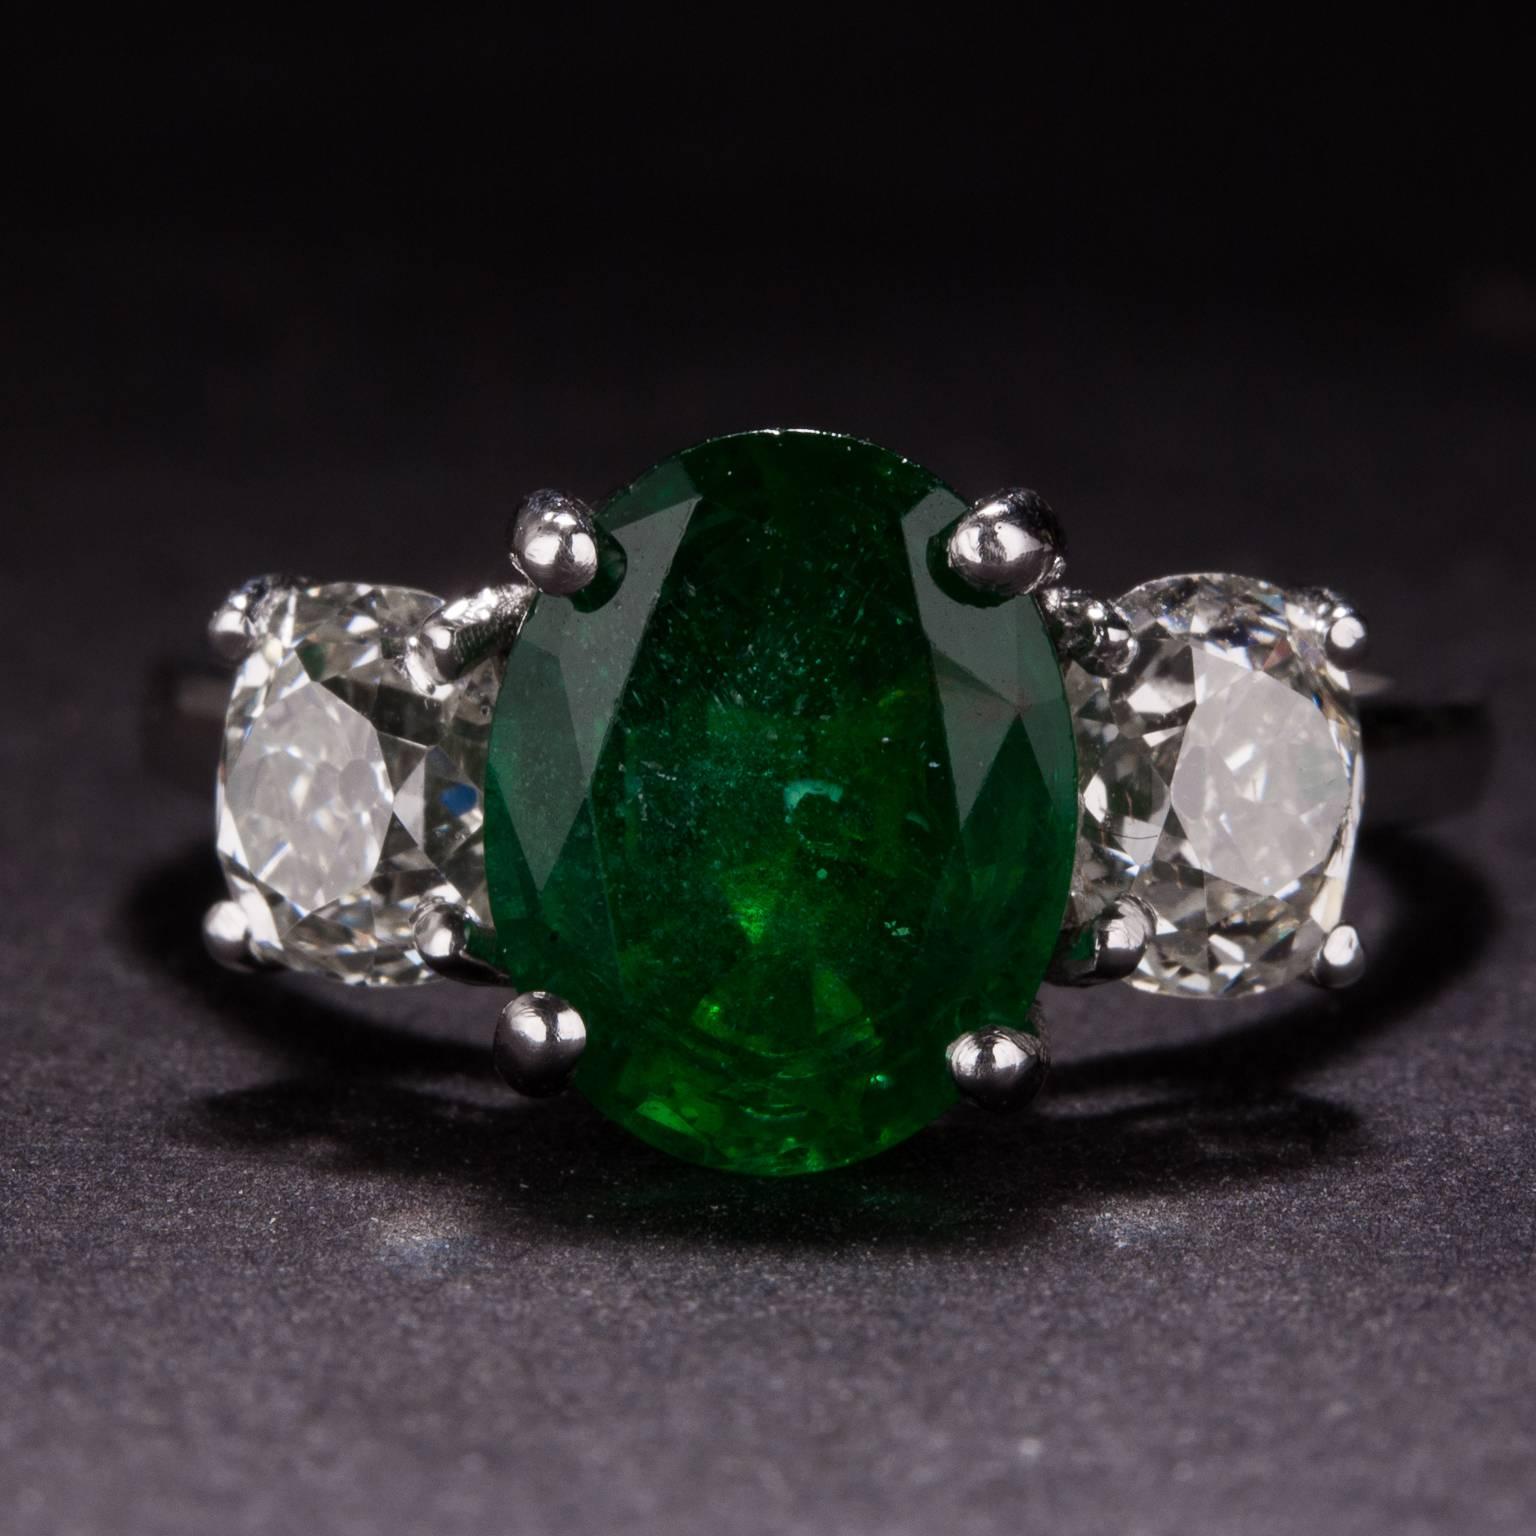 This ring features a beautiful 2.12 carat oval cut center emerald and 2 side diamonds for a total of 1.55 carats. The mounting is crafted in platinum and it is currently size 6.25.